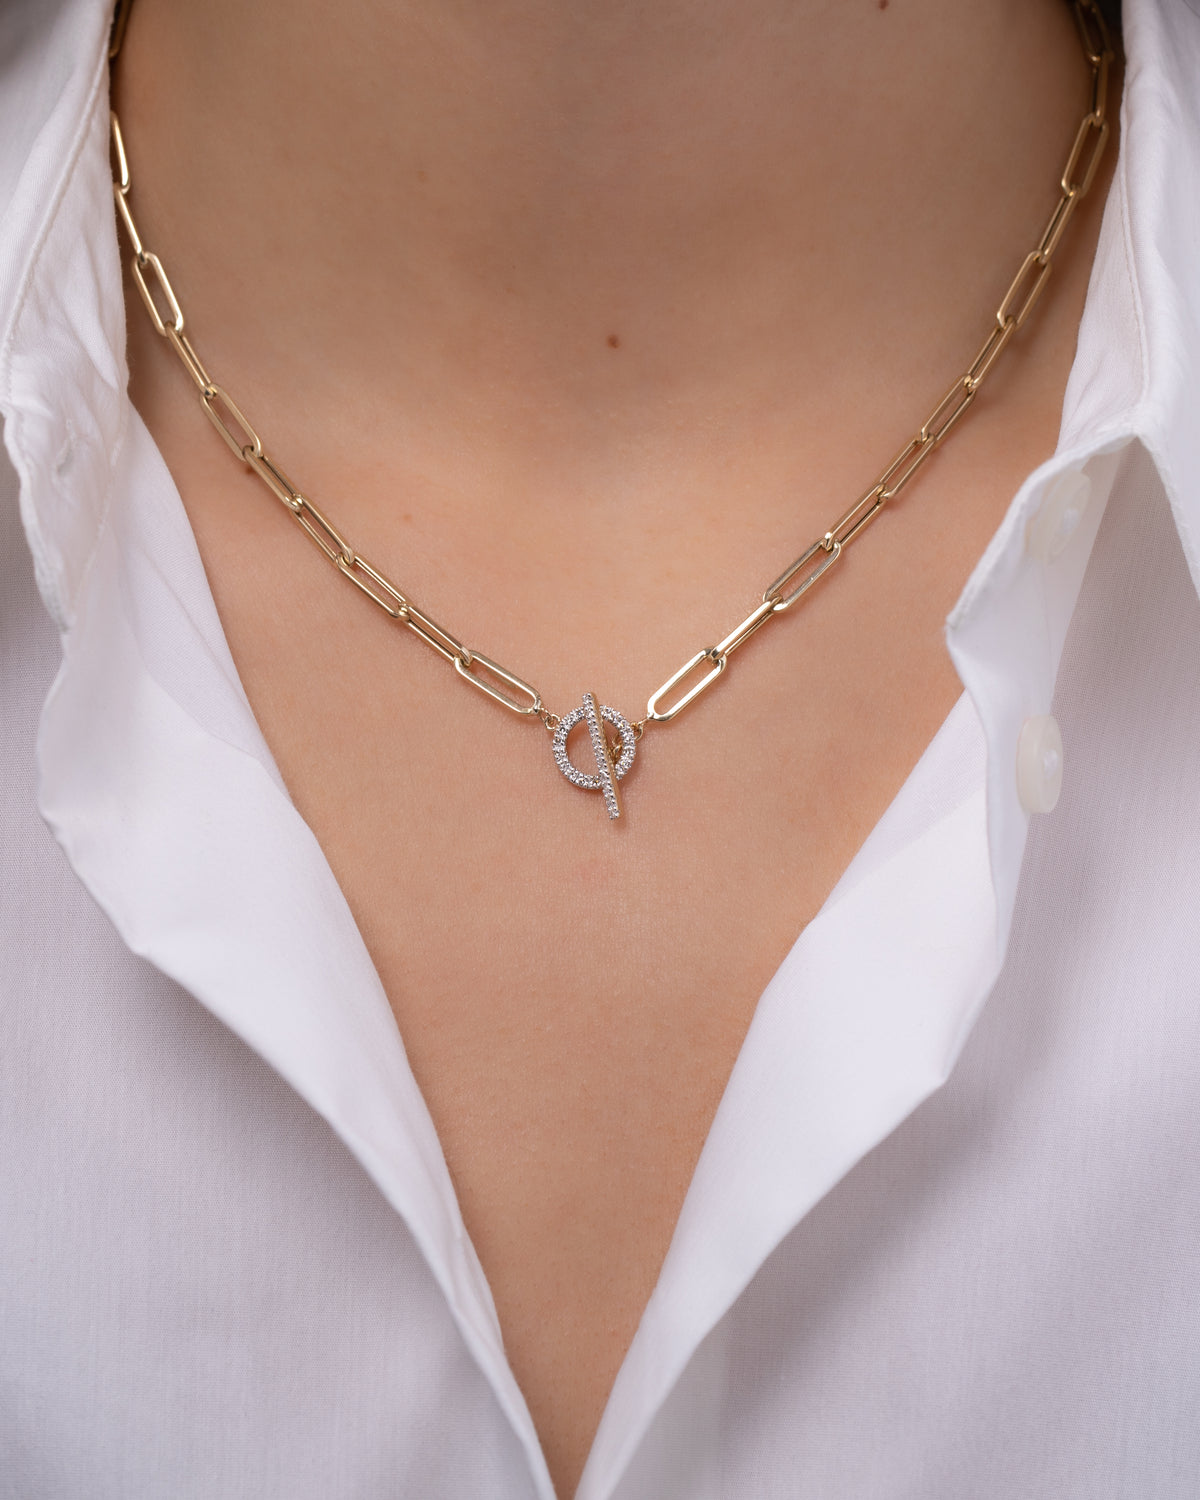 14k Gold Large Paper Clip Chain with Diamond Toggle Necklace